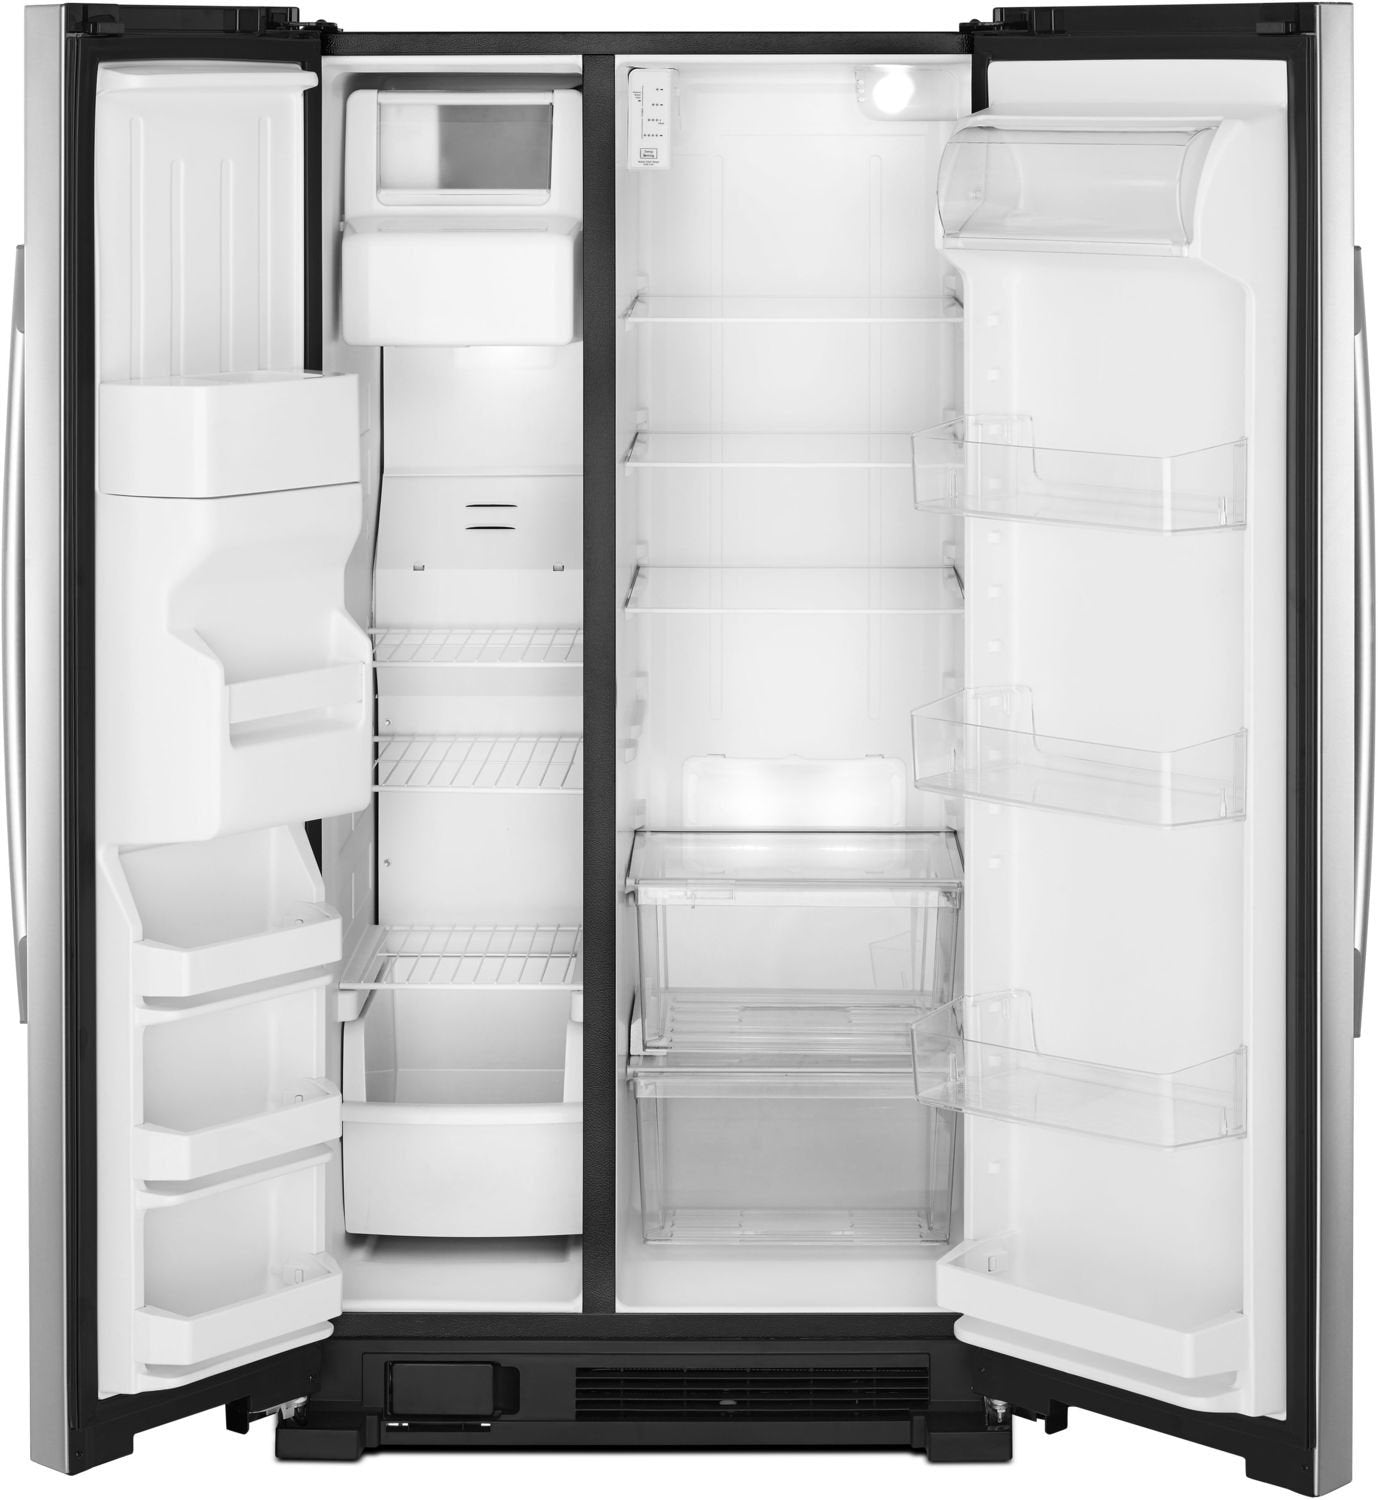 Amana Stainless Steel Side-by-Side Refrigerator (21.4 Cu. Ft.) - ASI2175GRS